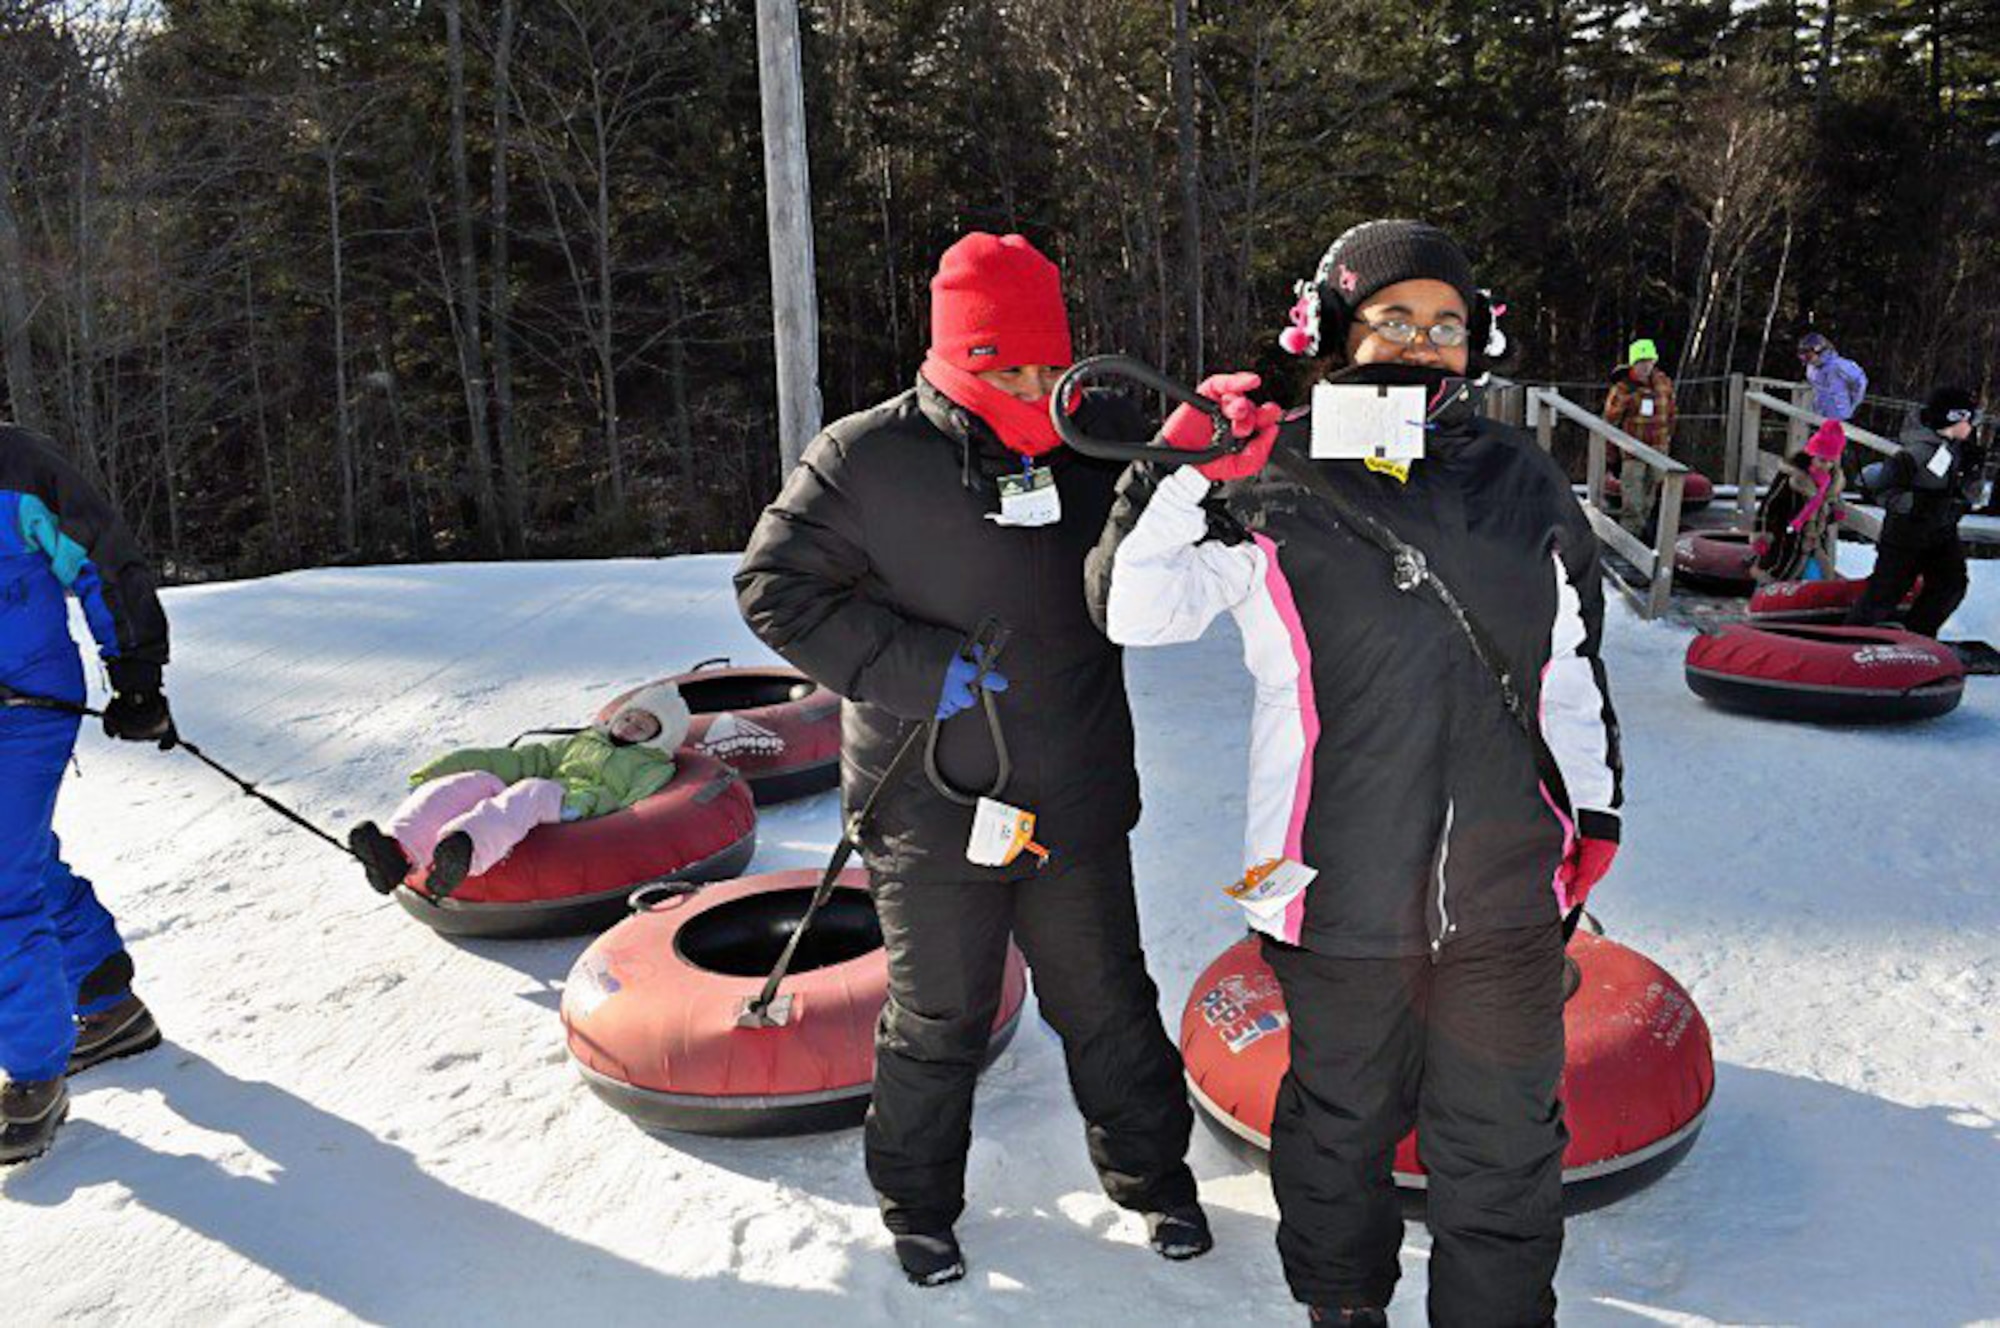 Air Force Reservist Tech. Sgt. Francine Torres (left) and her  17-year-old visually impaired daughter, Jasmyn Polite (right) attended a winter camp in New Hampshire for military teens with physical disabilities. They and about a dozen other nationwide teens enjoyed winter activities in the mountains. Torres is the knowledge operations manager for the 920th Rescue Wing, Patrick Air Force Base, Fla. (Courtesy photo)